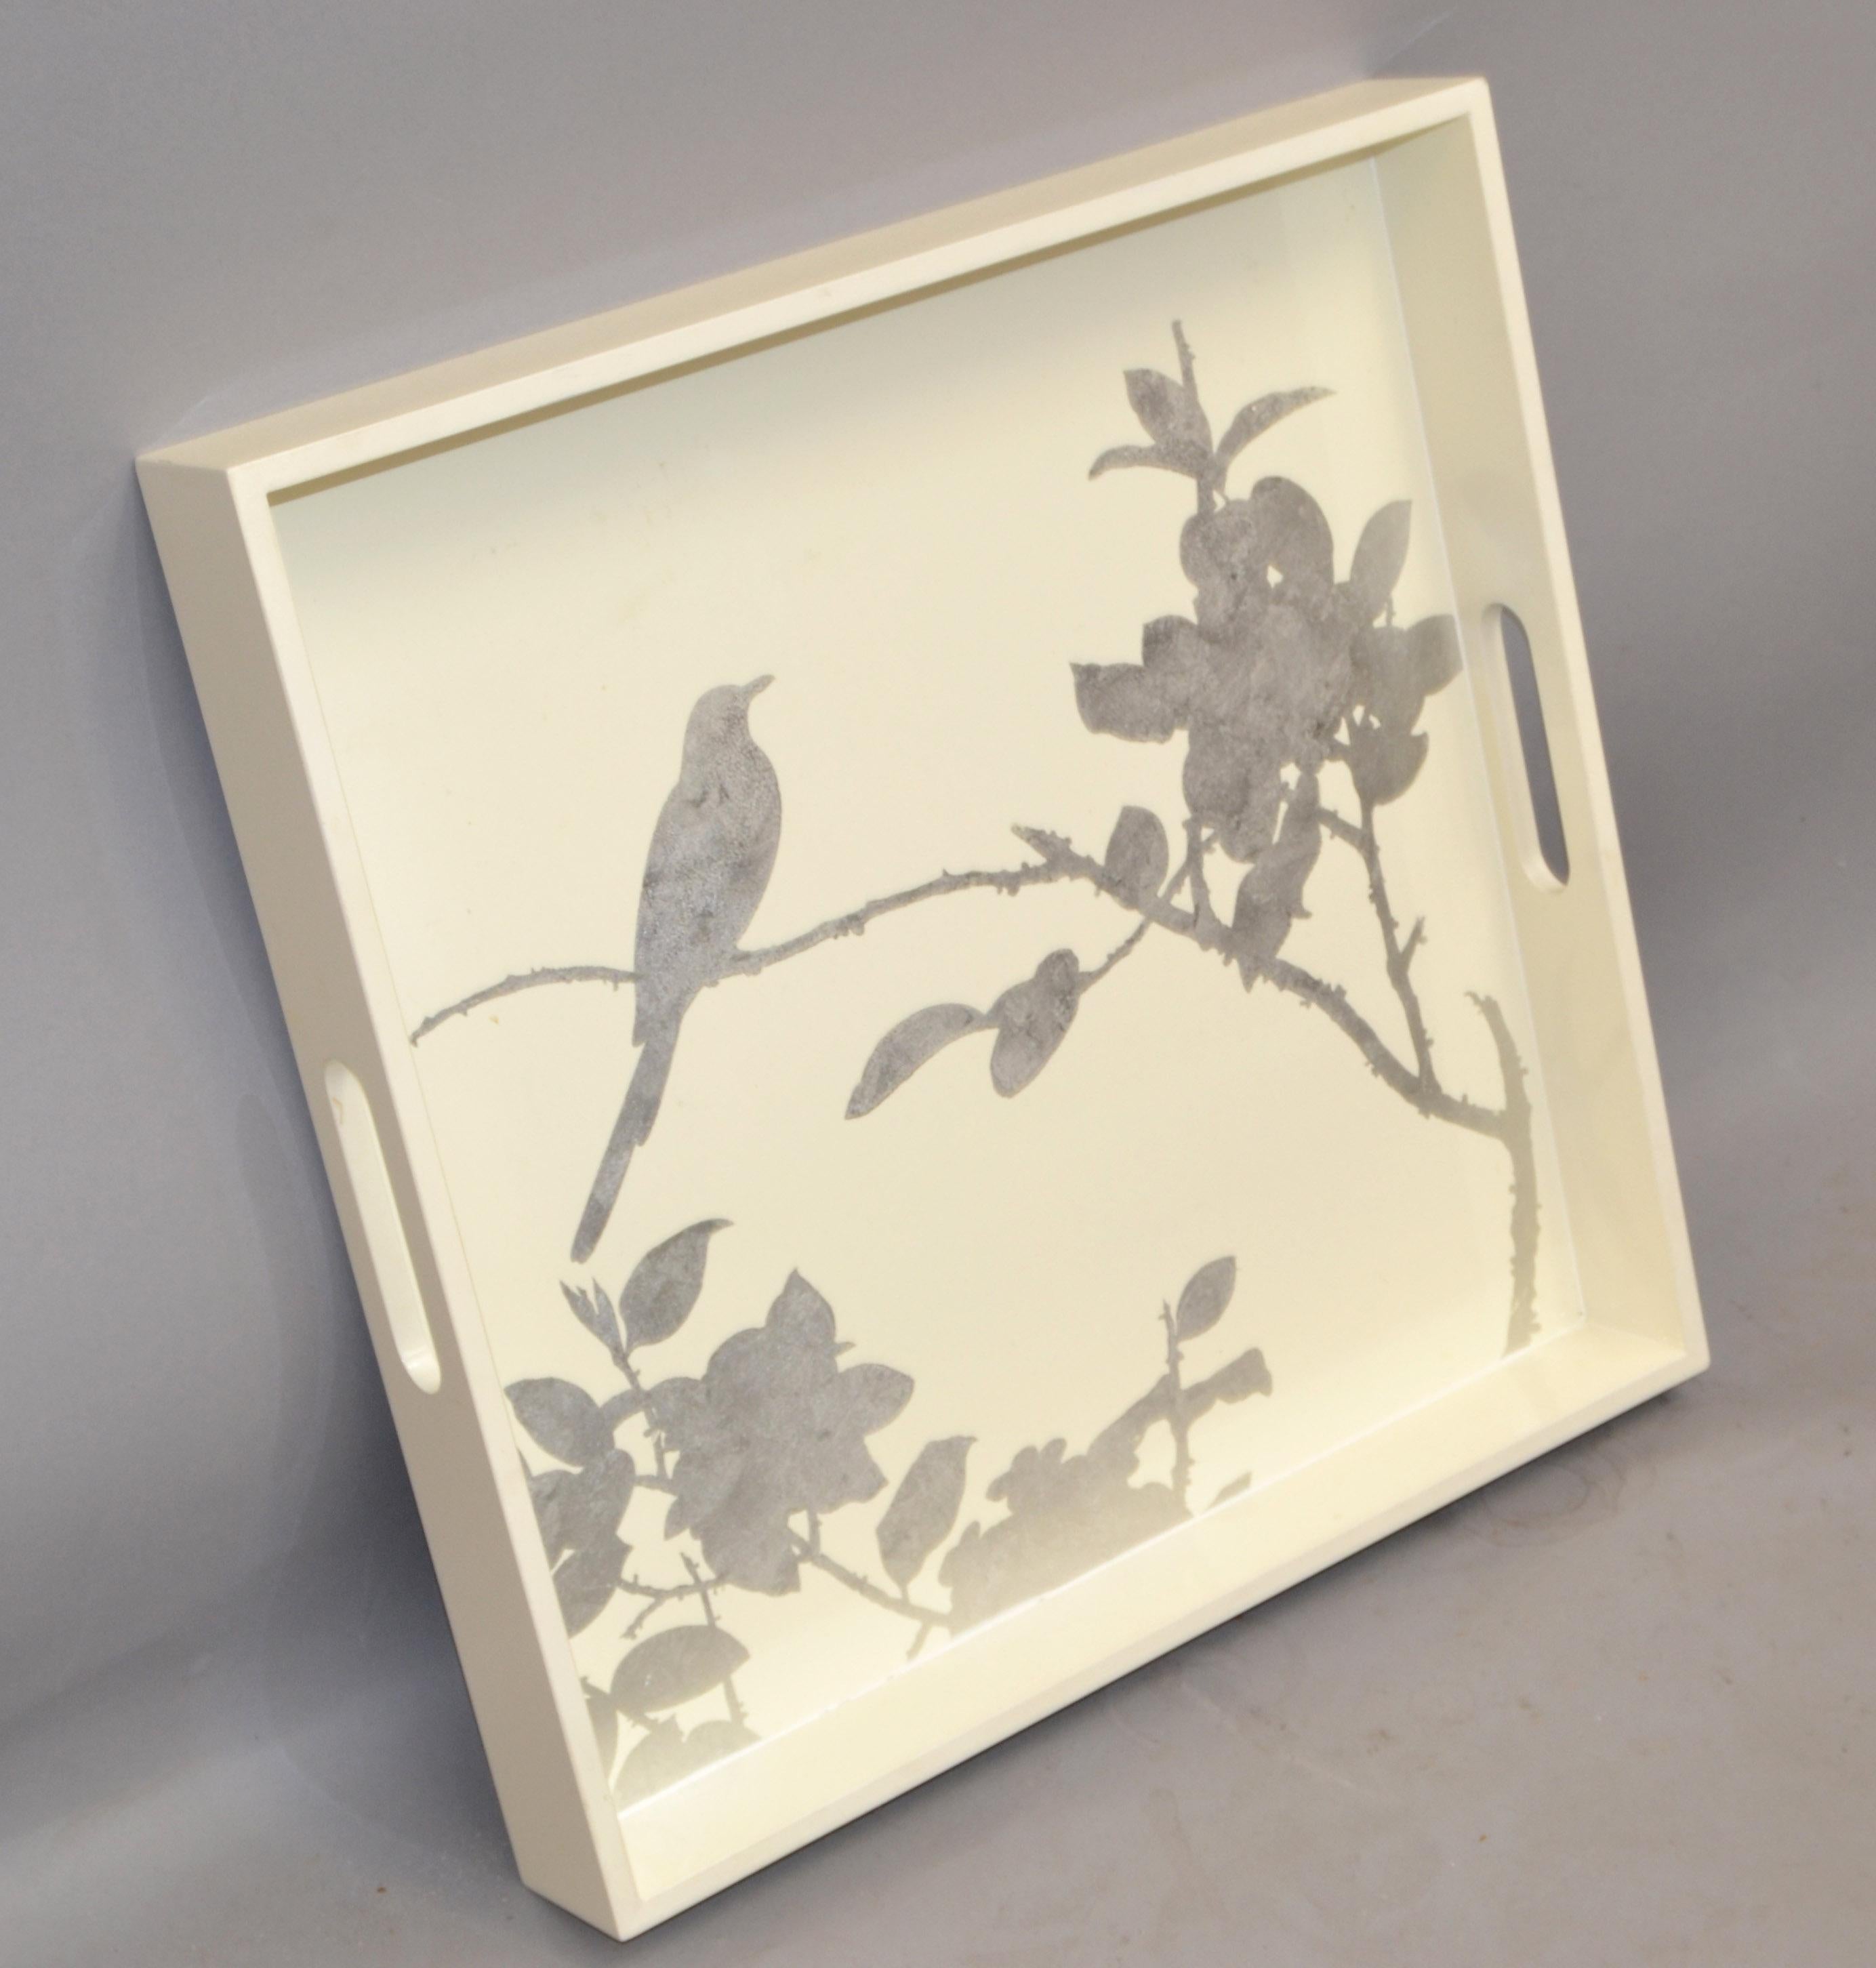 Japanese Style Square Vintage Serving Tray, Barware in Cream Color Finish Wood with hand-painted Silver Leaf Motif.
Depicting a Bird resting on a Flower Bush. Mid-Century Modern Period with Asian Modern Fine Art Painting. 
In very good condition